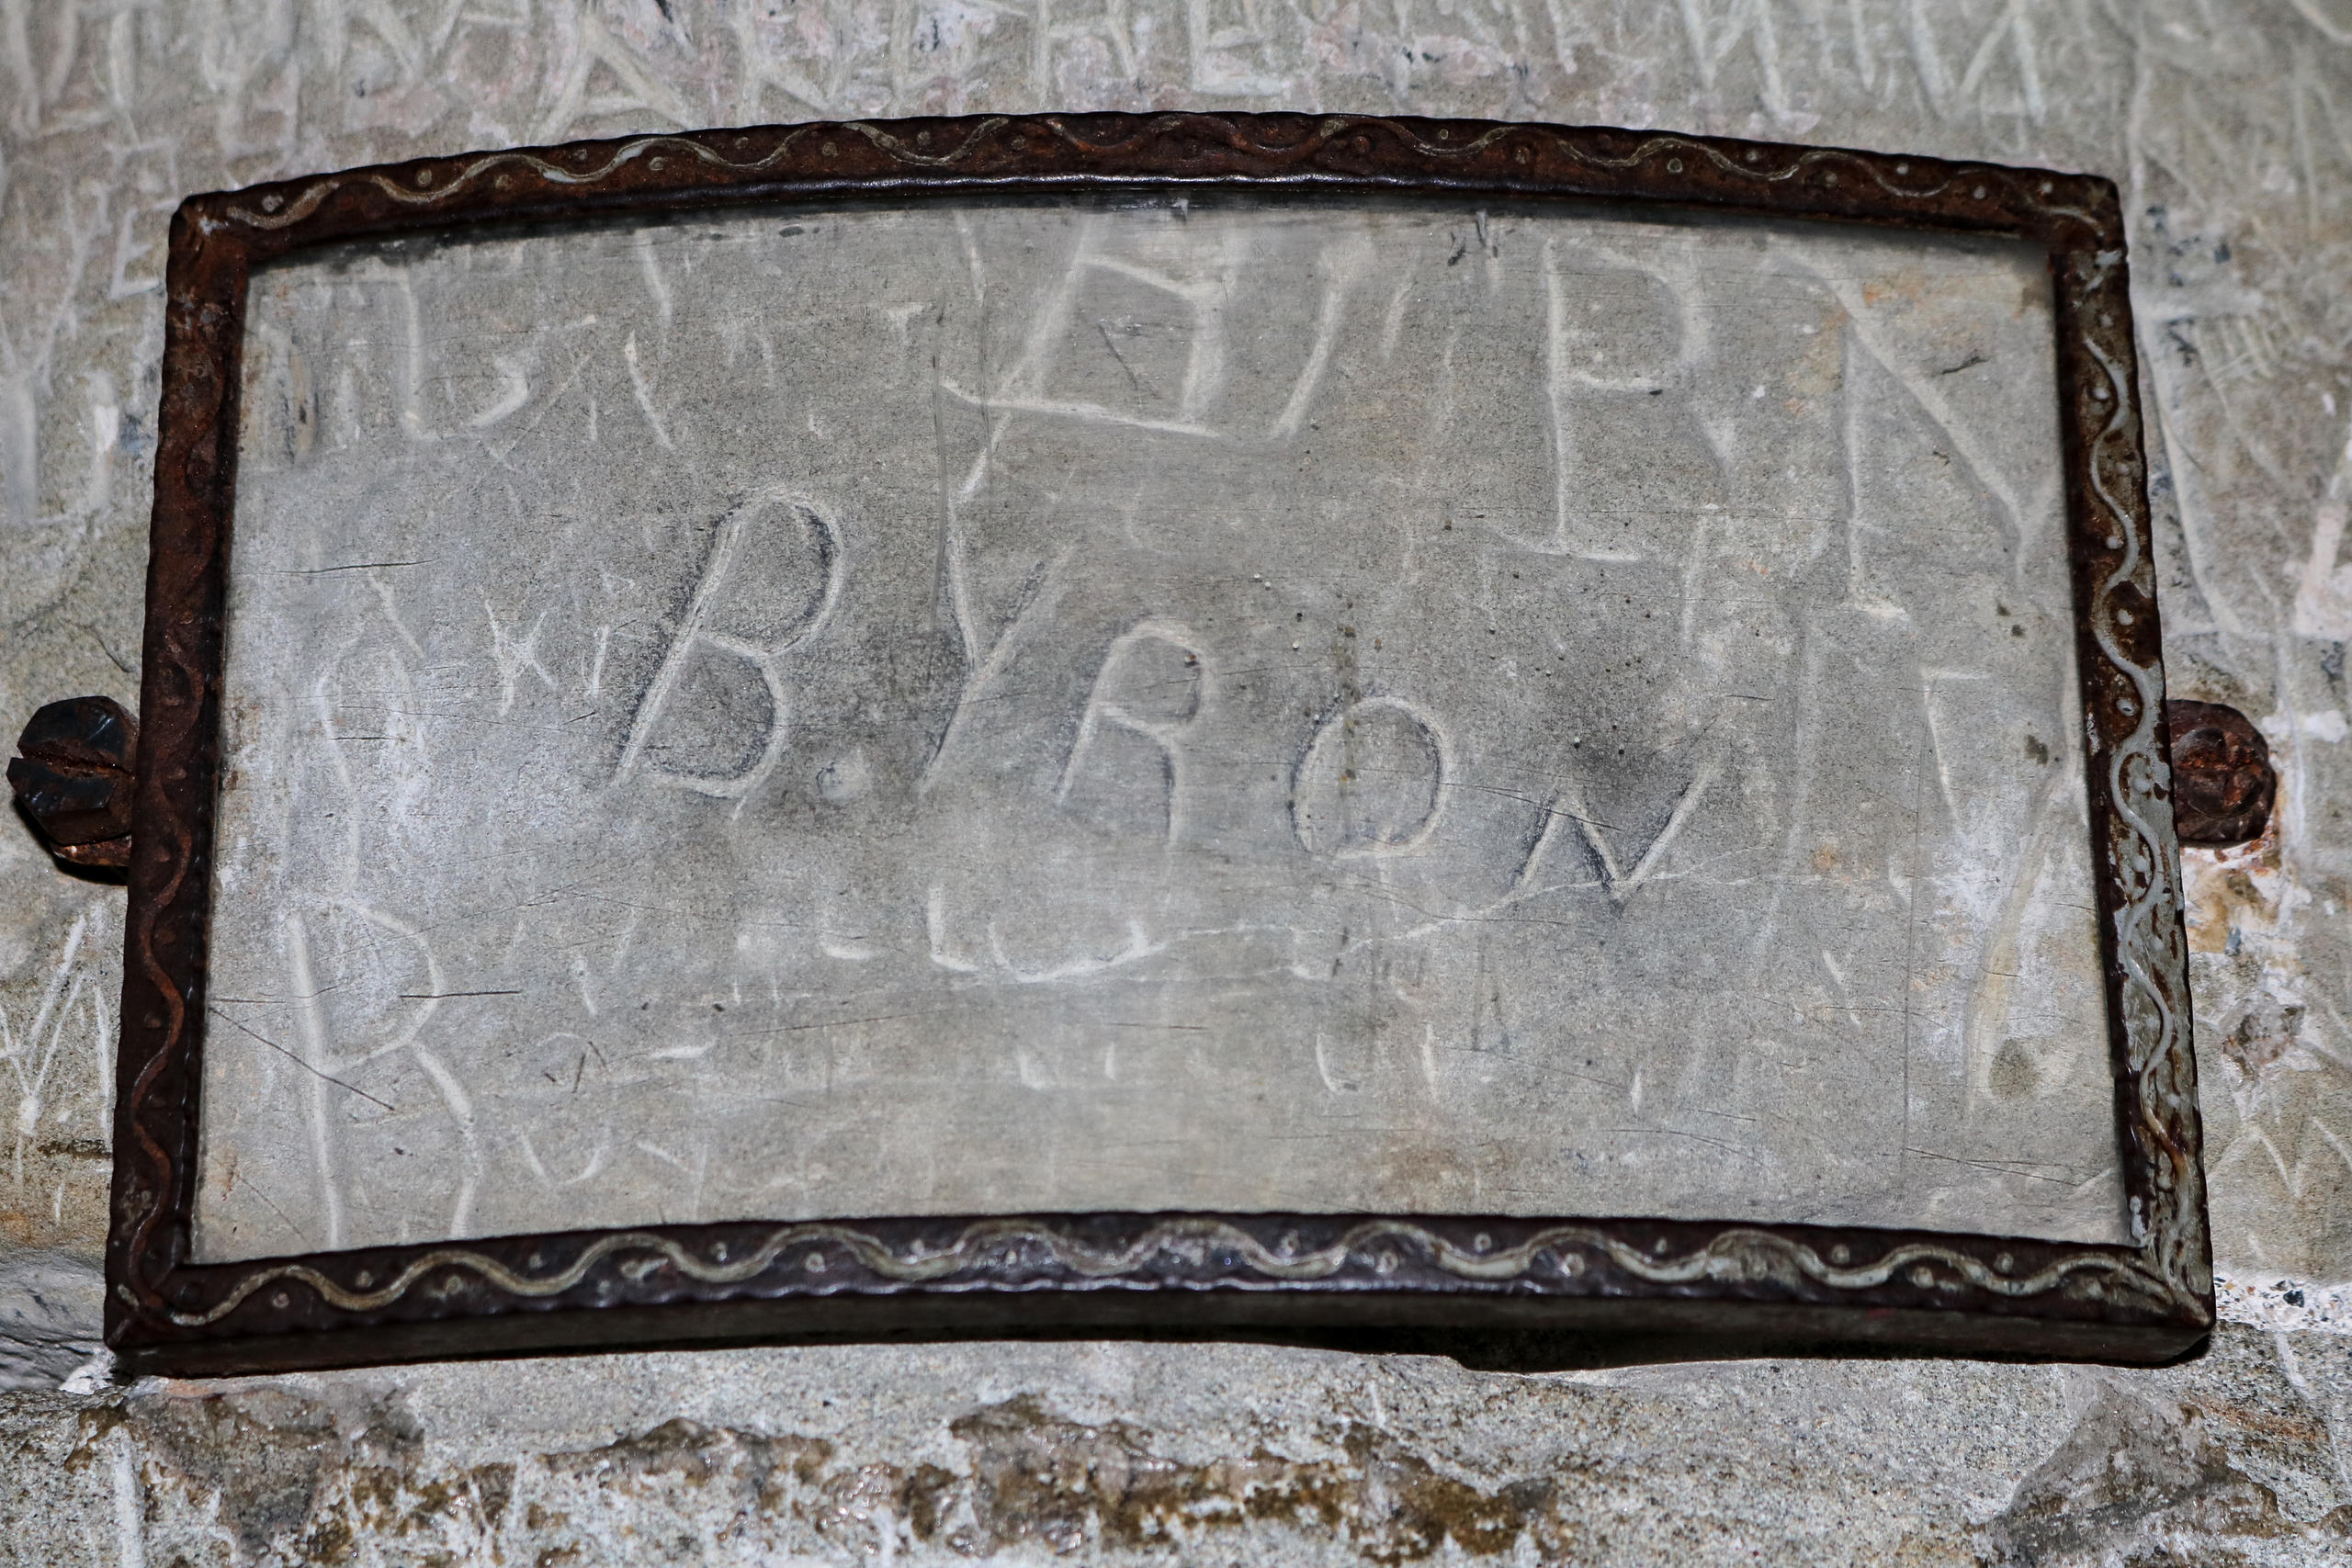 Byron visited the Château de Chillon in 1816 but historians remain divided over the authenticity of his signature in the dungeon.